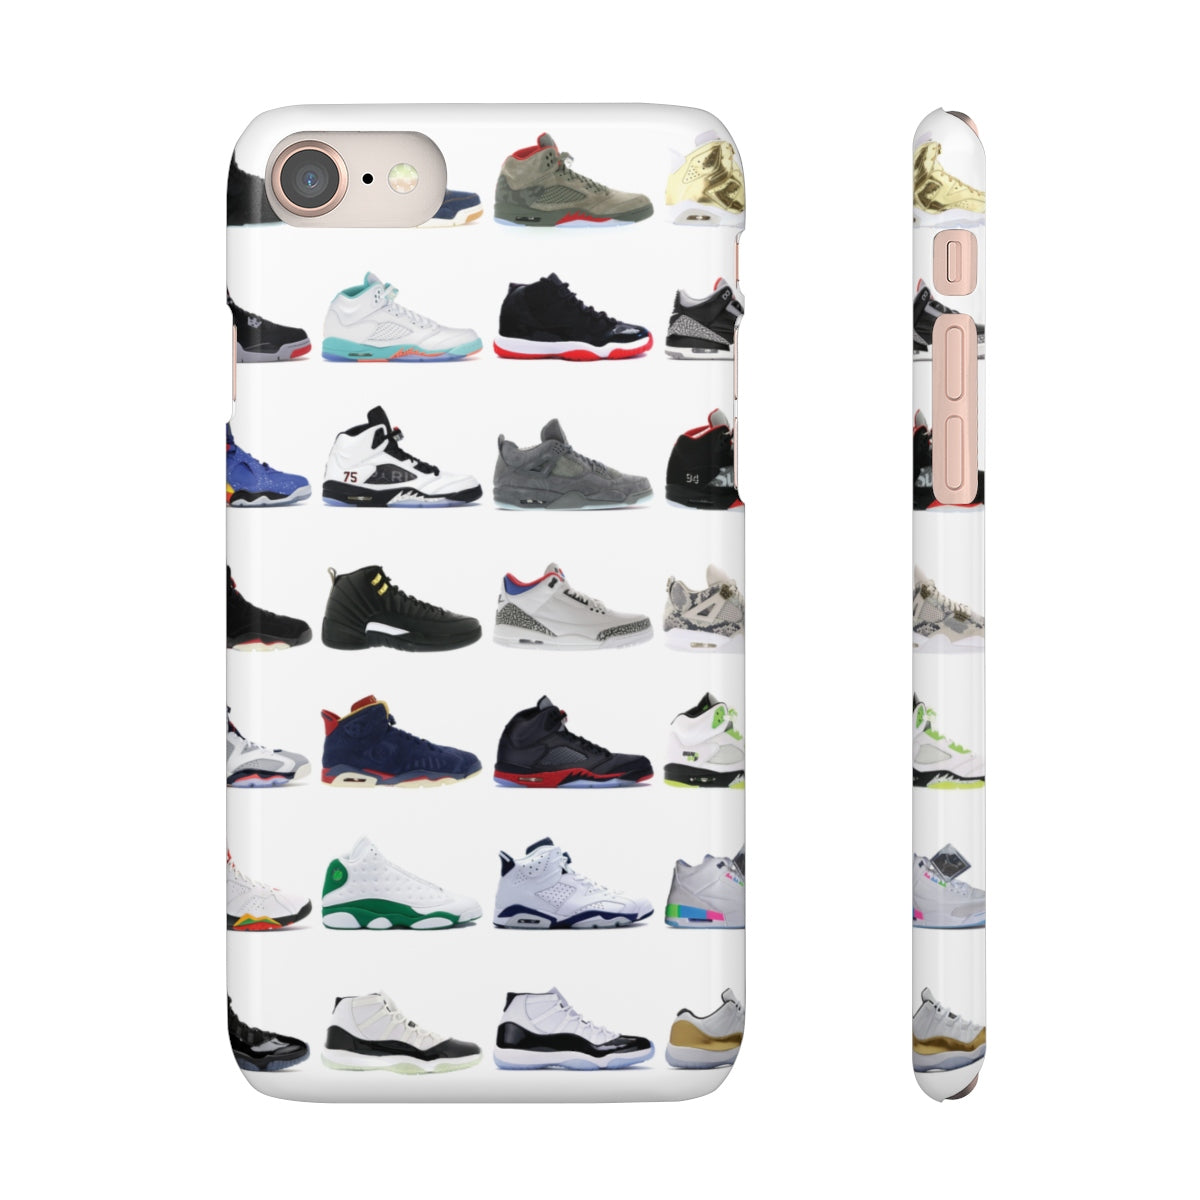 Jordan Sneakers inspired iPhone Snap Case-iPhone 8-Glossy-Archethype